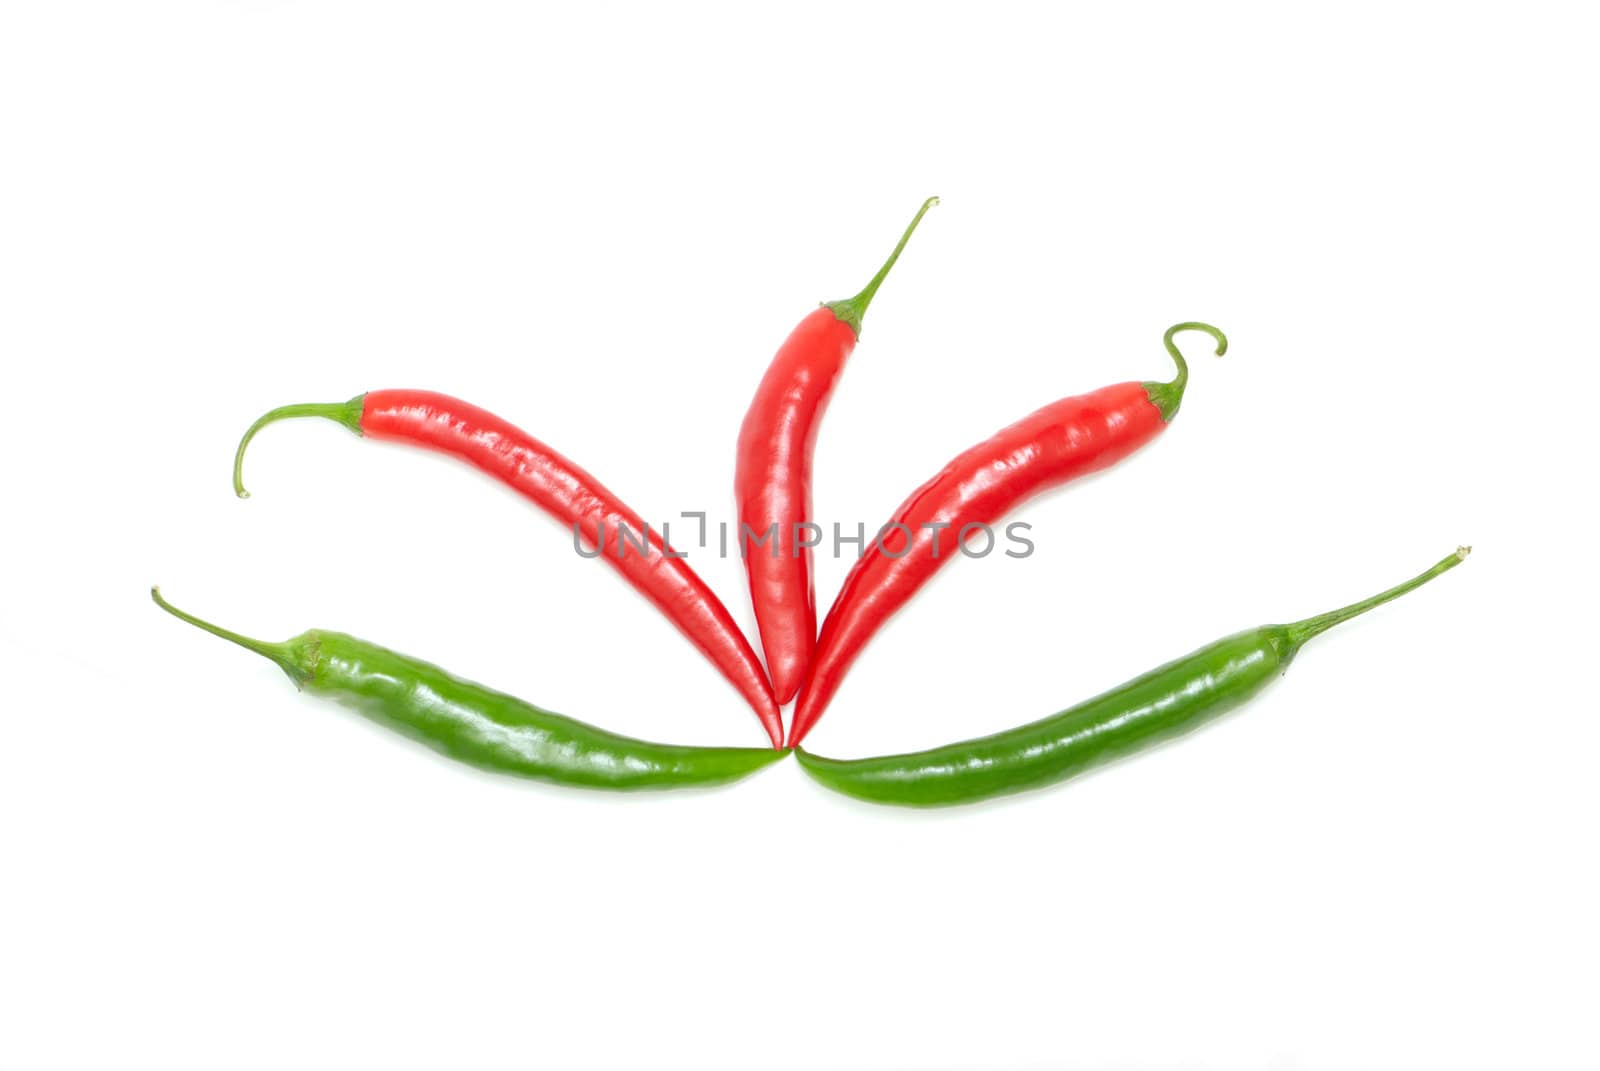 Colored chili peppers on a white background